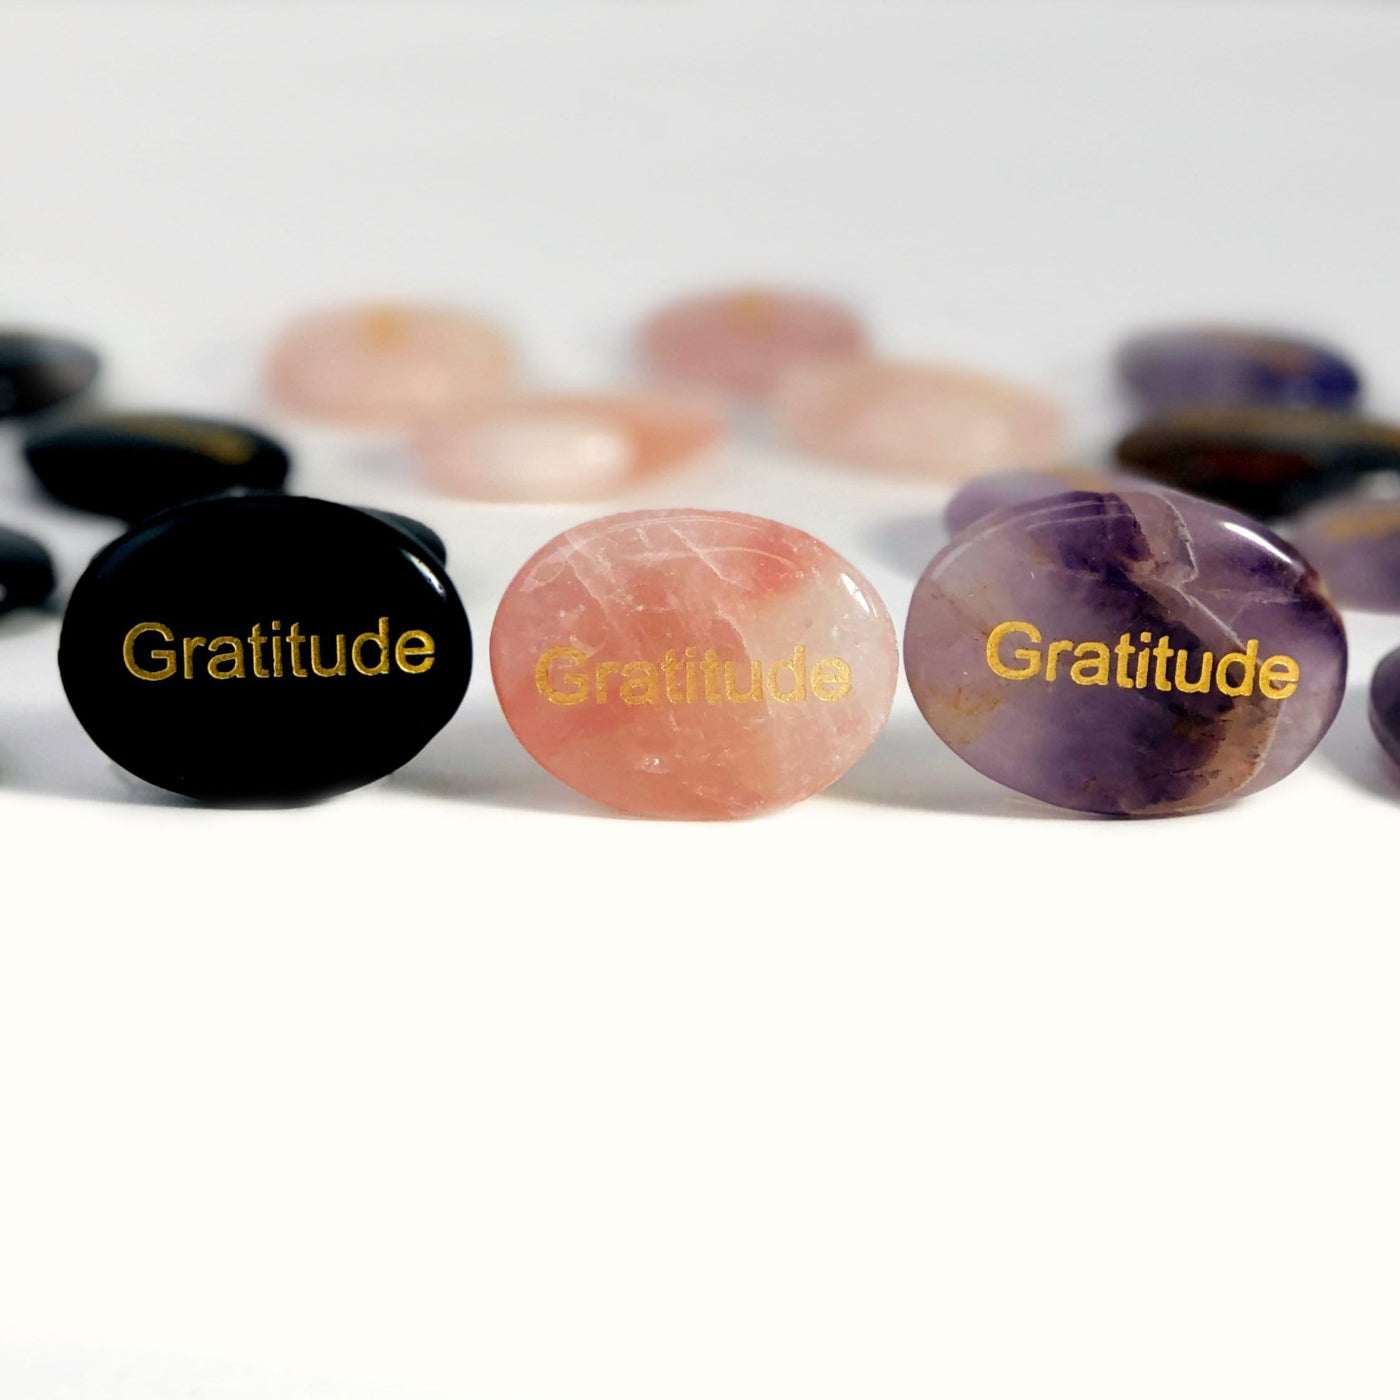 Pocket Stone "Gratitude" Palm Stones, one of each stone propped up on a white surface.